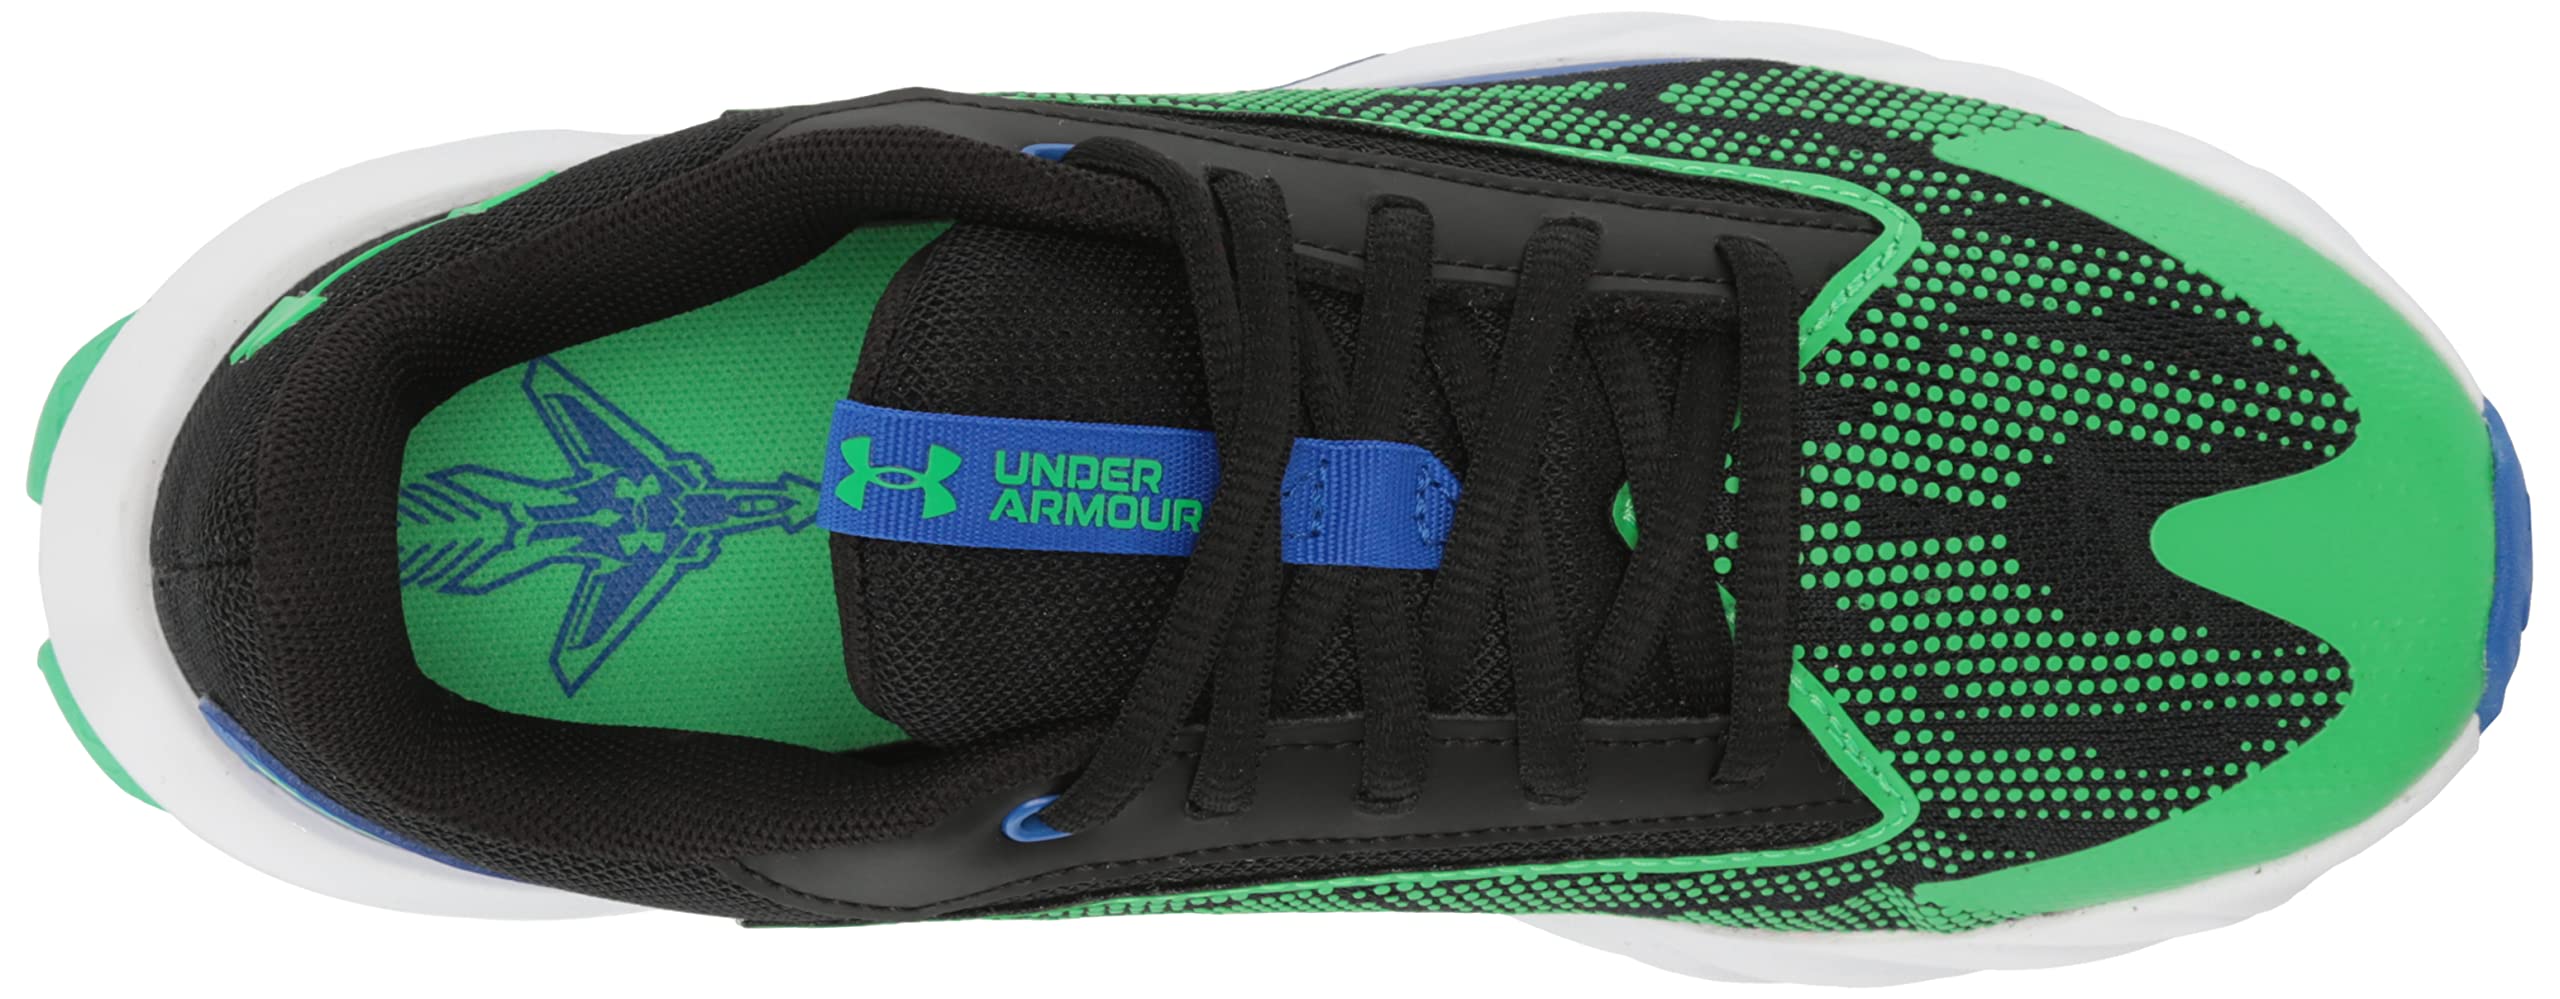 Under Armour Boy's Charged Scramjet 4 Running Shoe